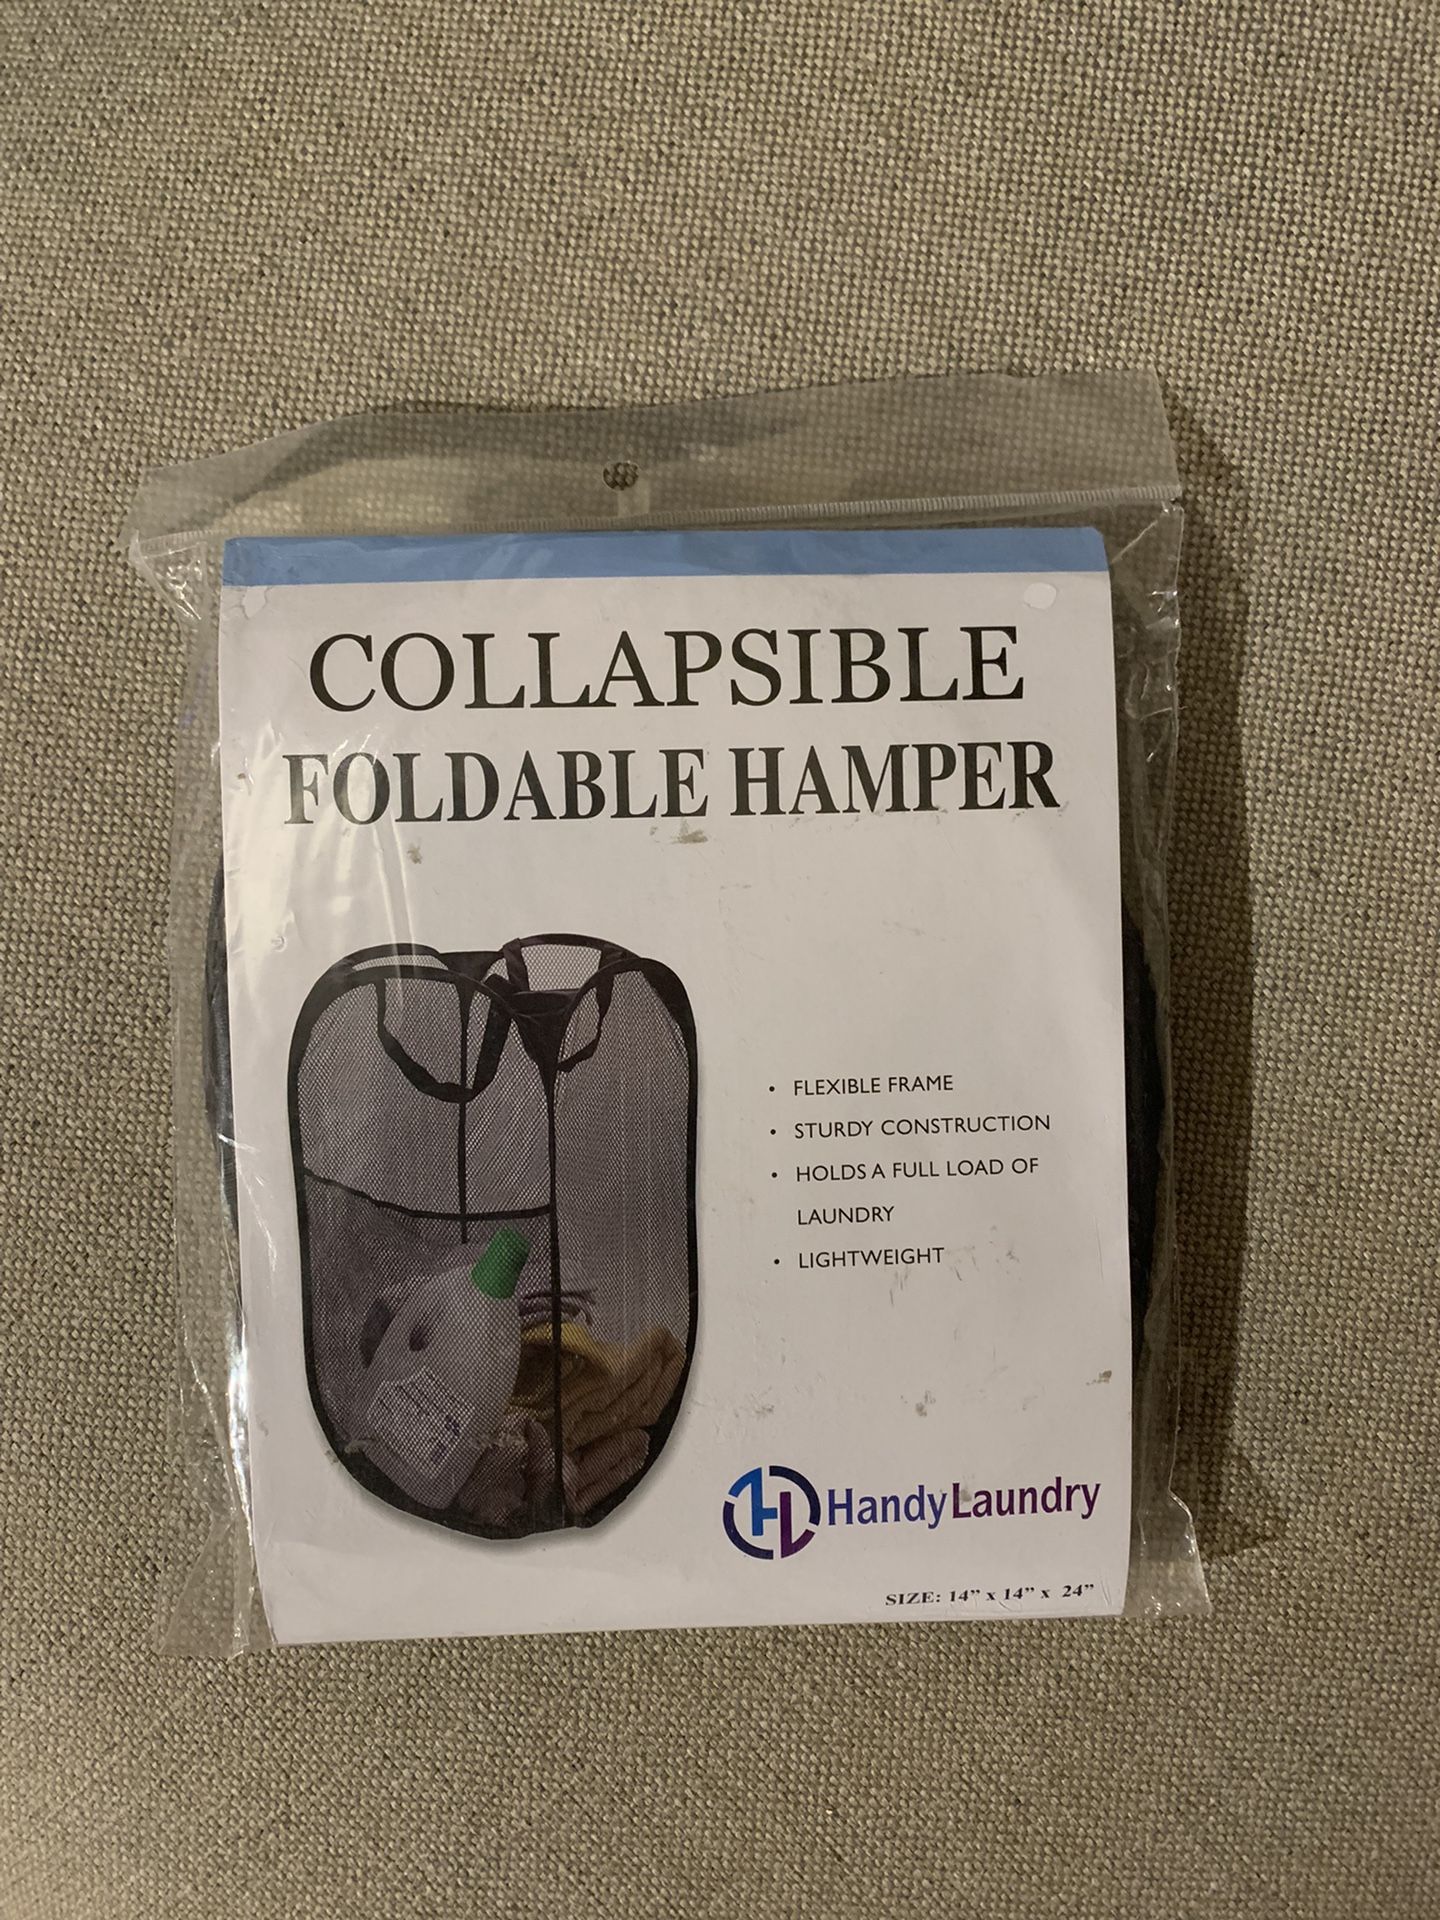 Collapsible Foldable Hamper